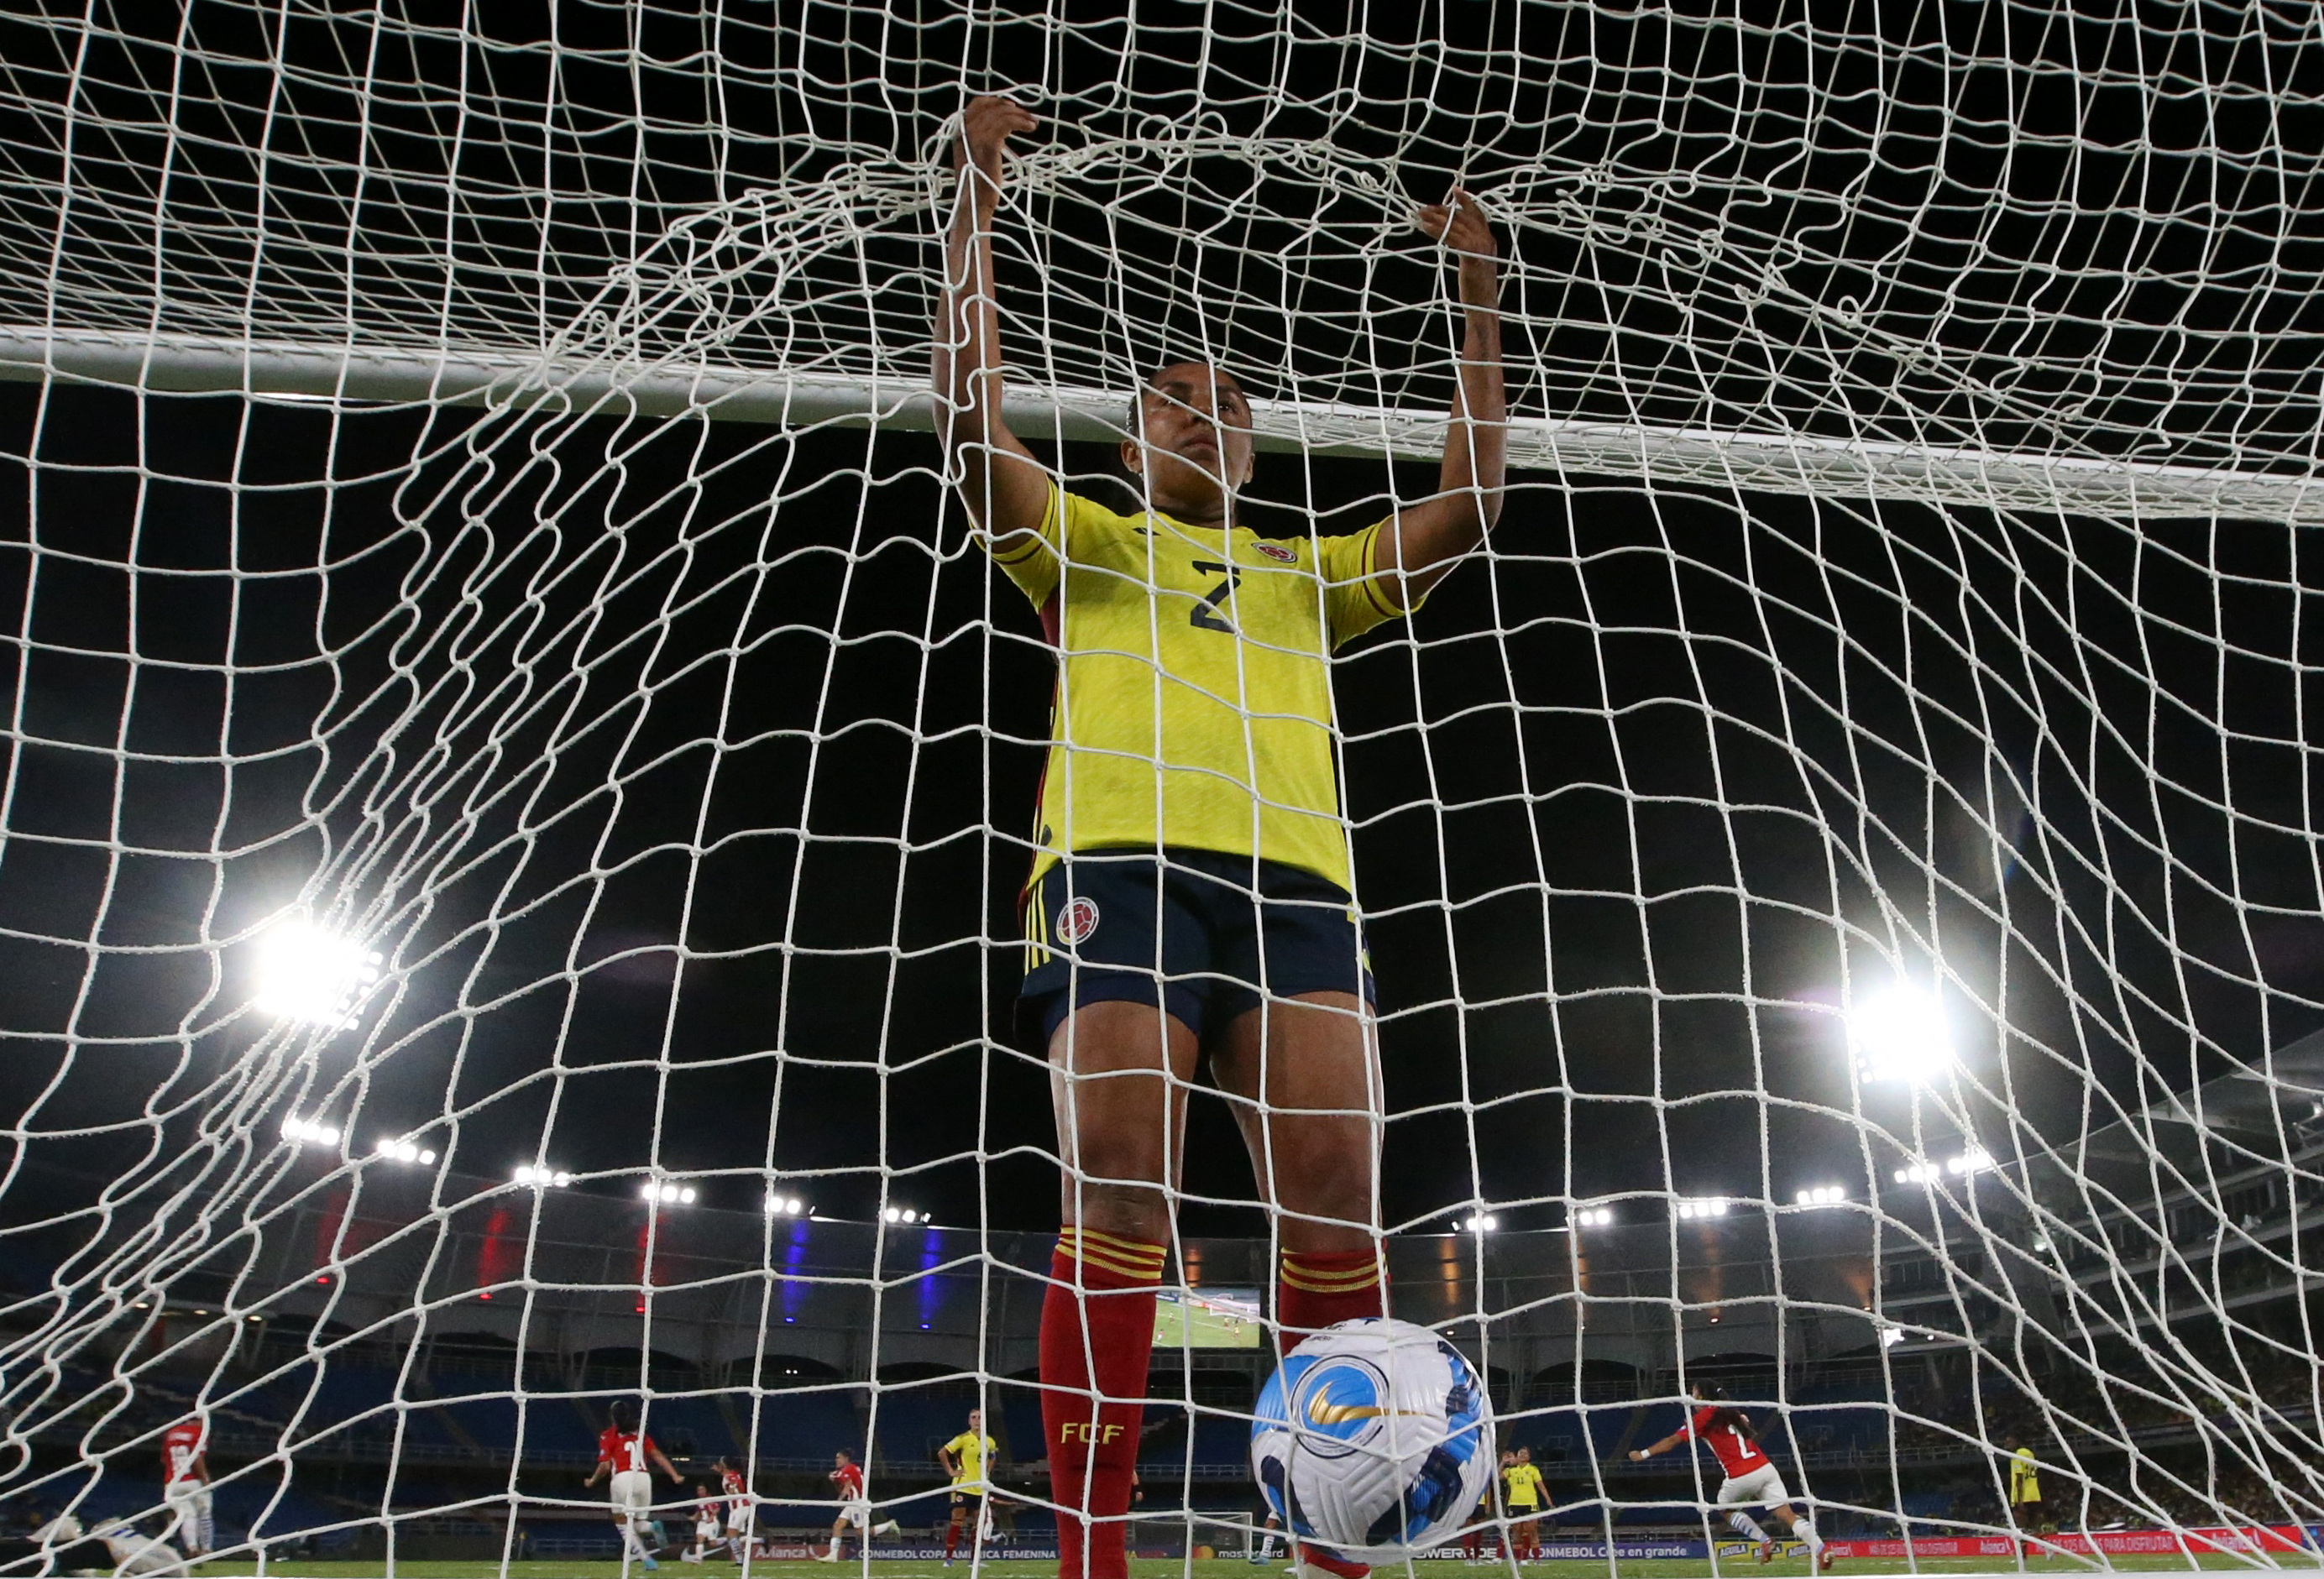 Soccer Football - Women's Copa America - Group A - Colombia v Paraguay - Pascual Guerrero Stadium, Cali, Colombia - July 8, 2022 Colombia's Manuela Vanegas looks dejected after Paraguay's Jessica Martinez scored her first goal REUTERS/Luisa Gonzalez